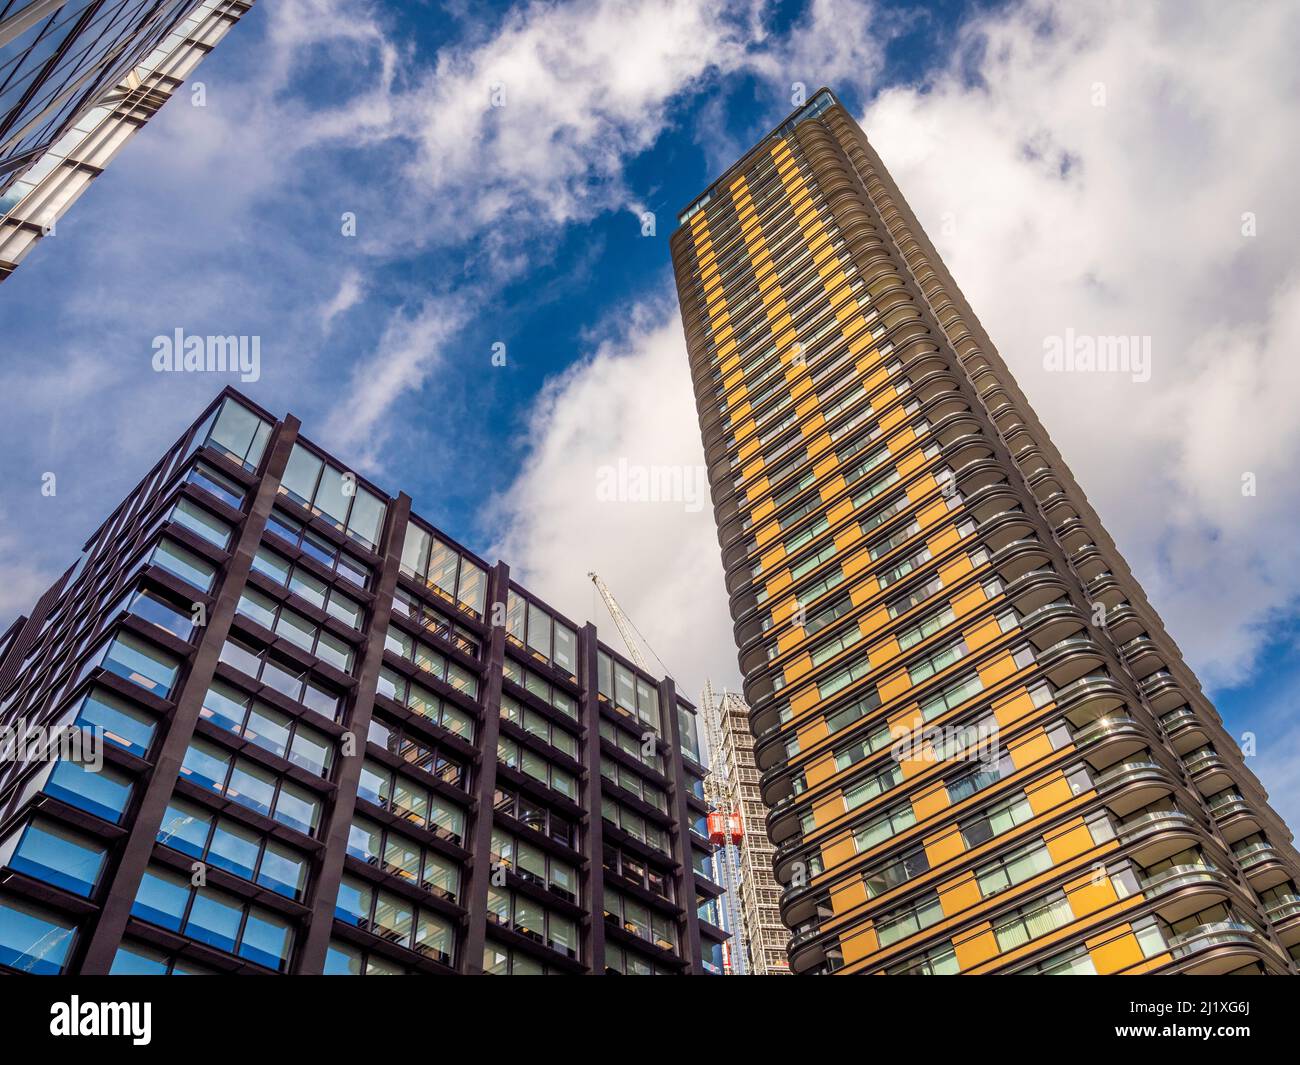 Principal Place and Principal Tower seen from ground level looking upwards towards a blue sky. London. Stock Photo